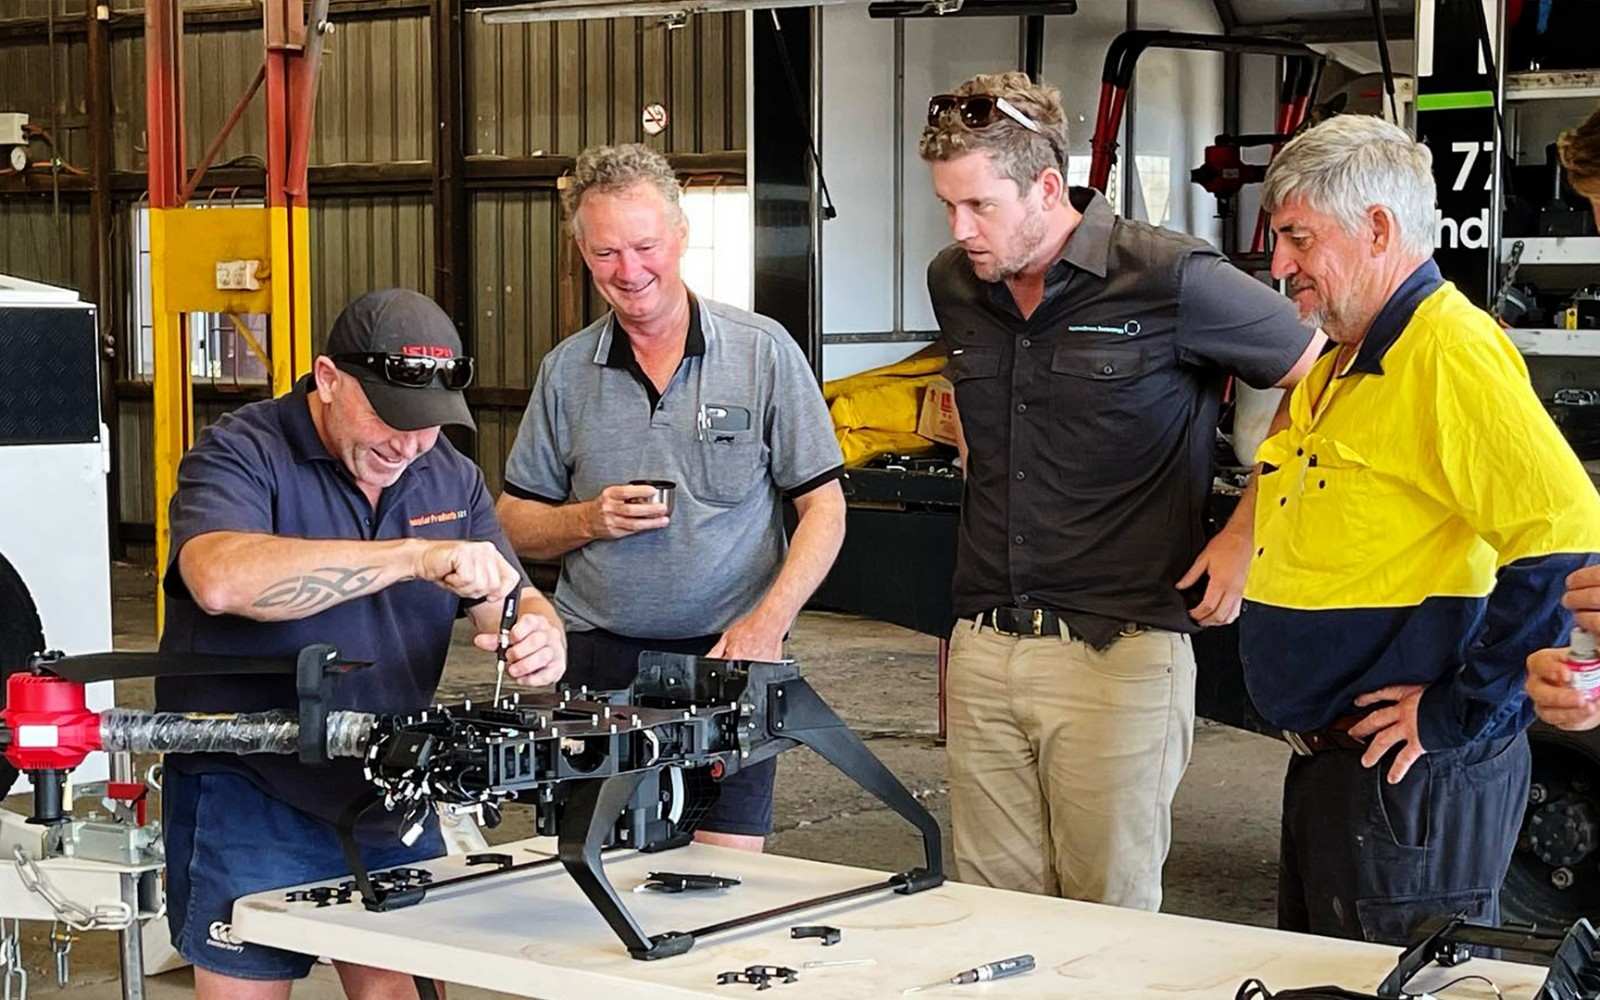 Being watched by colleagues might be a bit nervous, but attention is needed while tightening the screws on drone. (Australia, source: Oztech Drones)